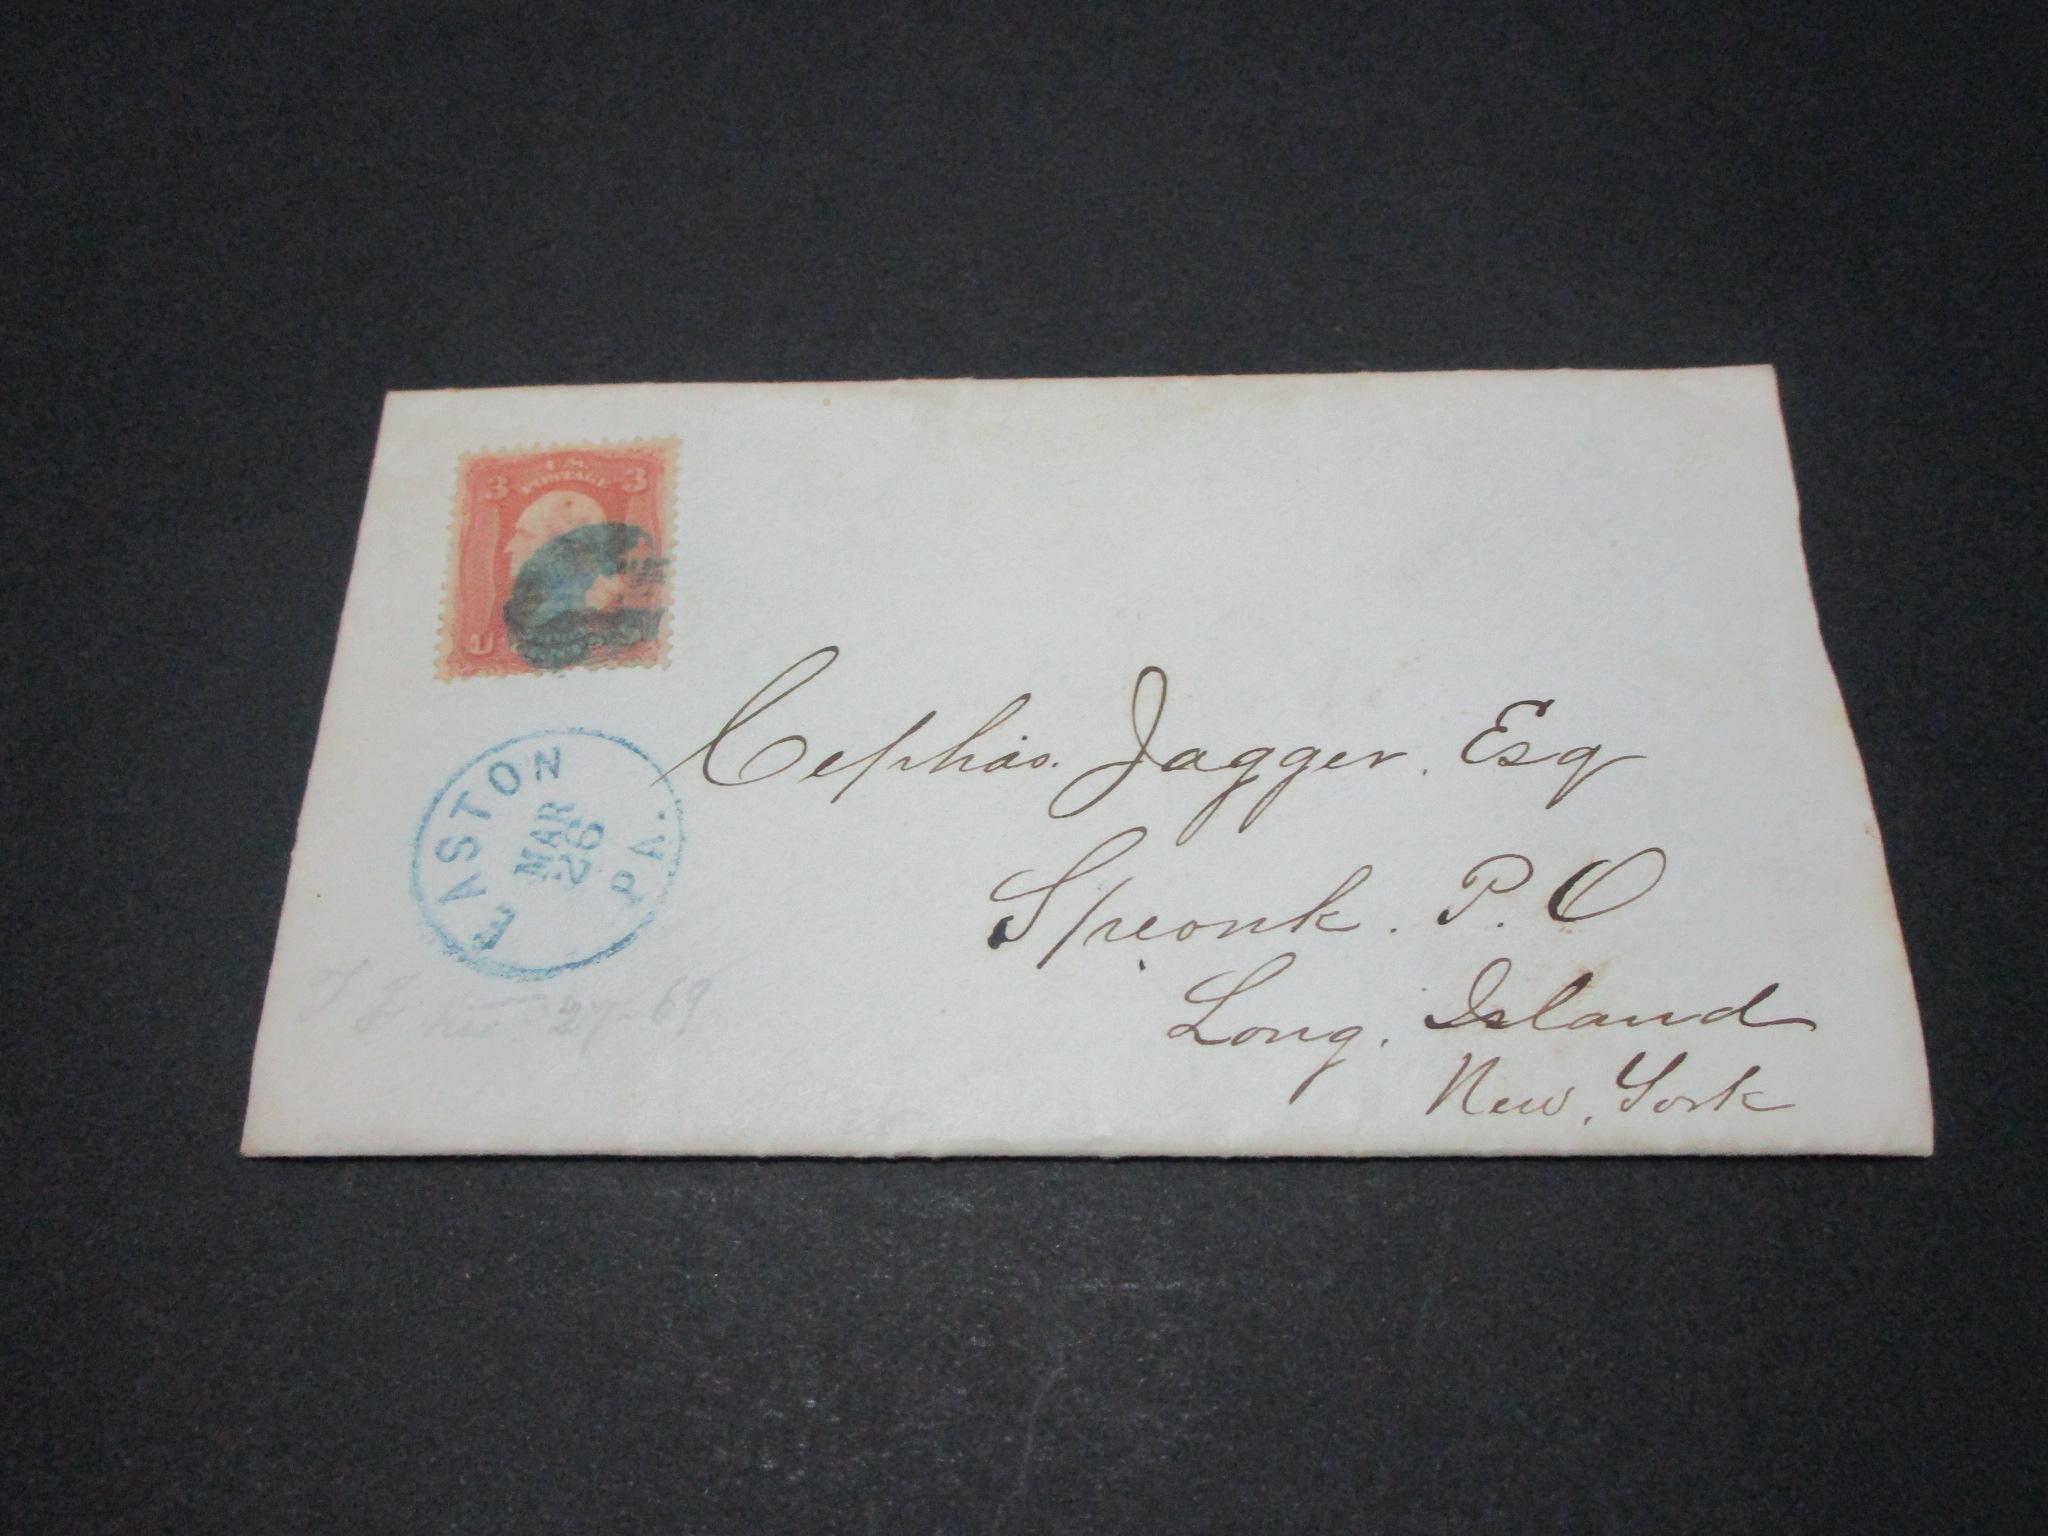 Scott 64 - Post Civil War Letter Dated March 26, 1869.  Letter Included